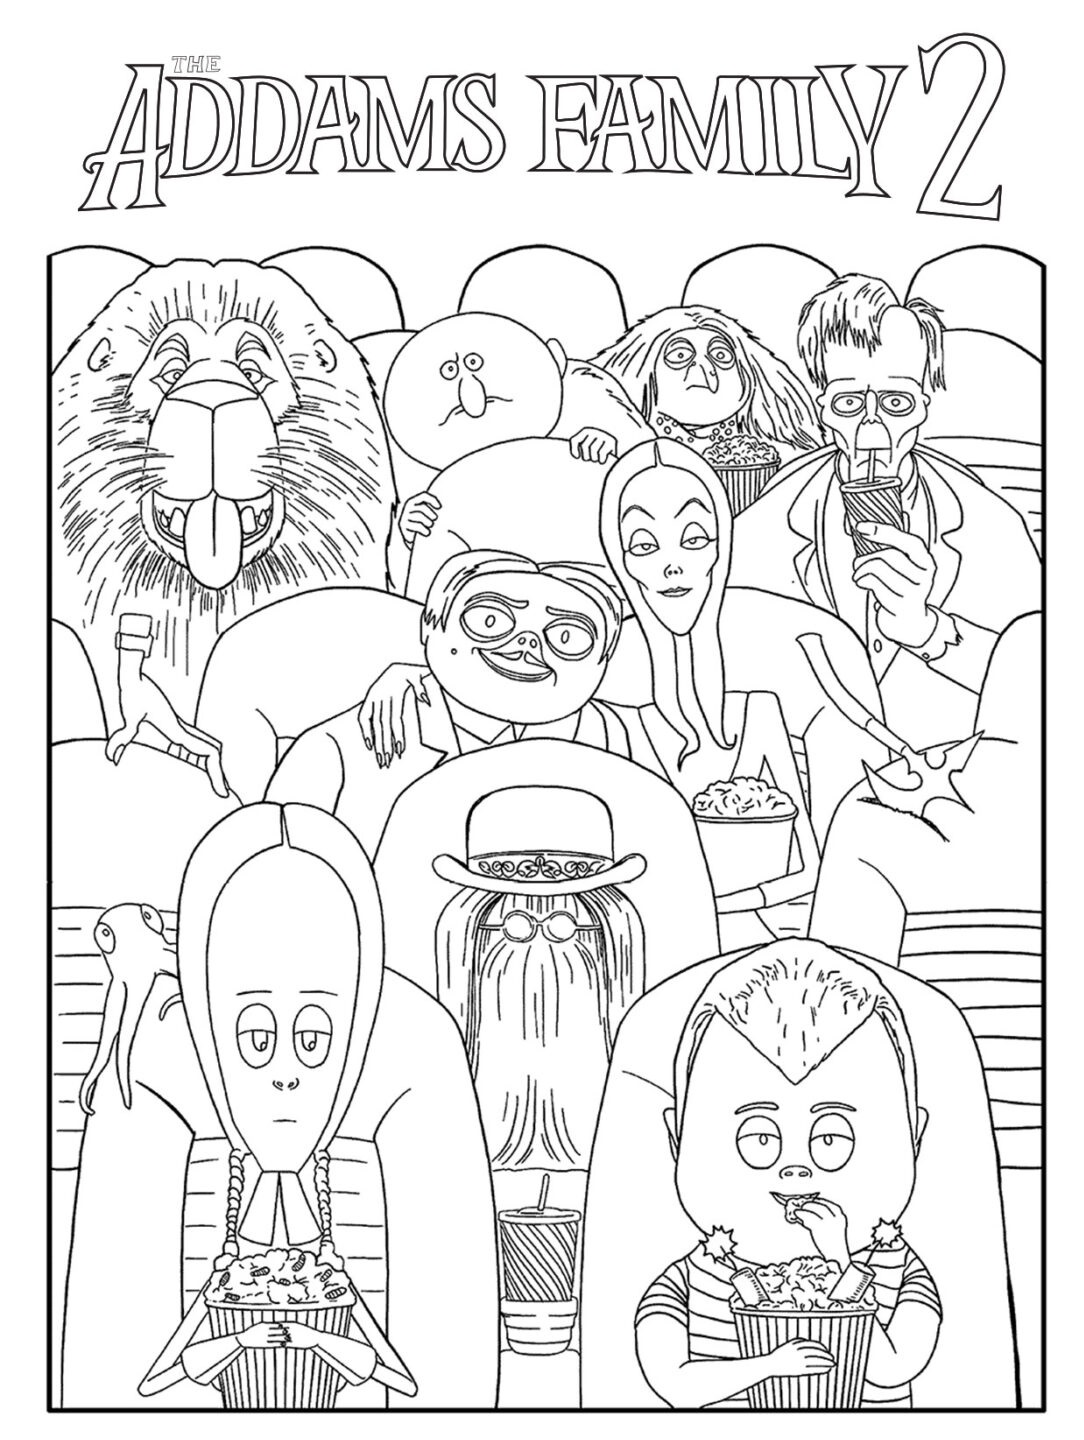 The Addams Family Coloring Pages: A Timeless Icon of Gothic Culture - Addams Family 2 Coloring Pages